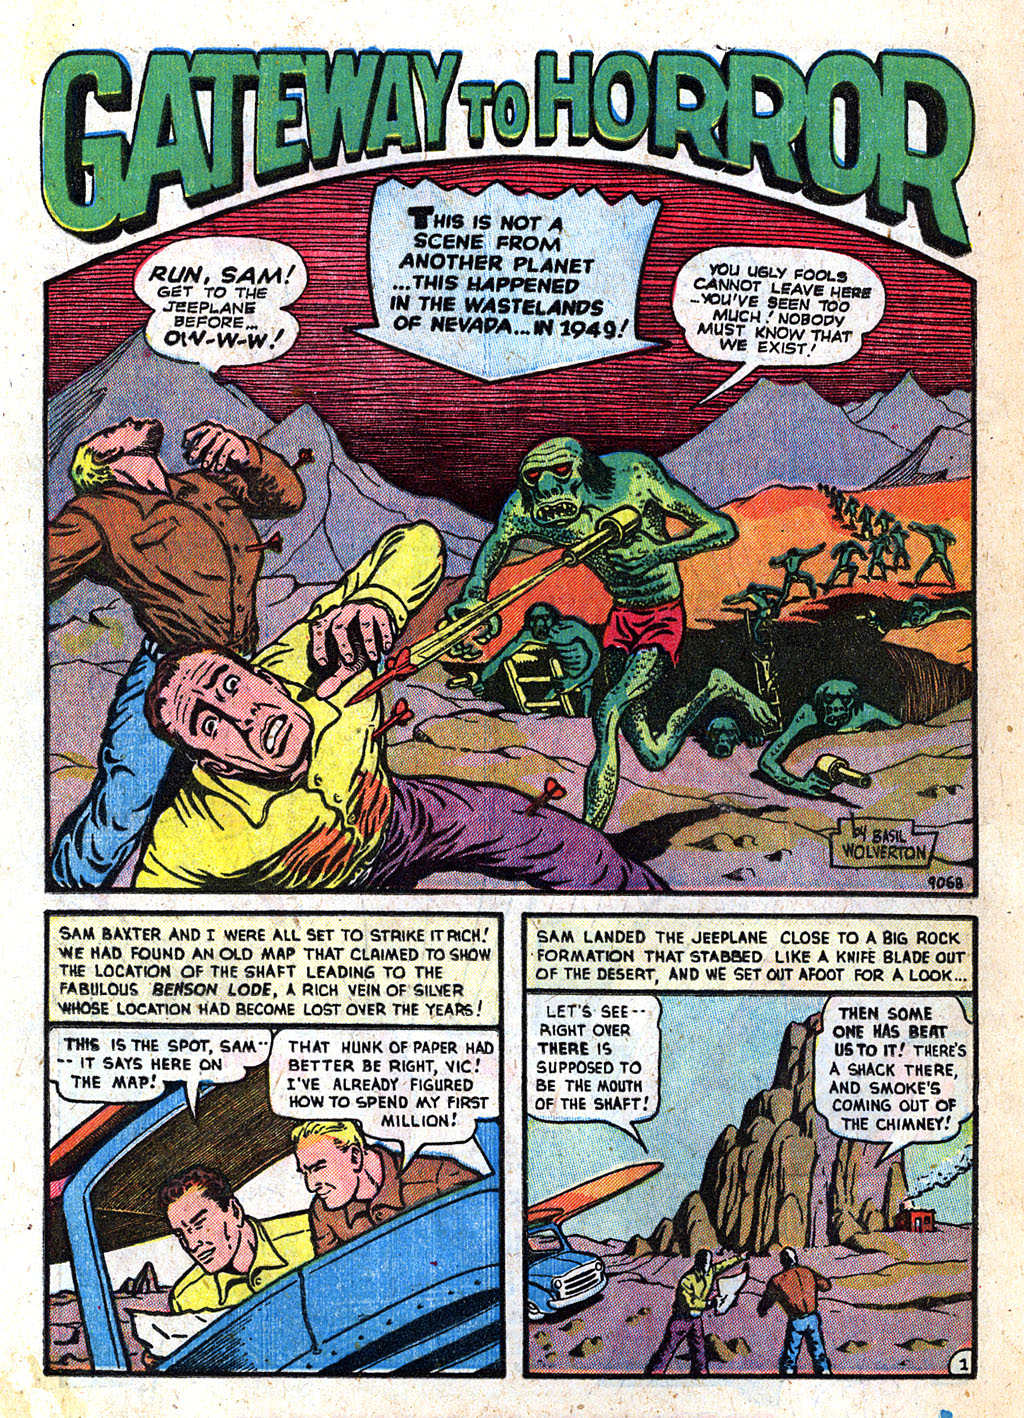 Marvel Tales (1949) 104 Page 11